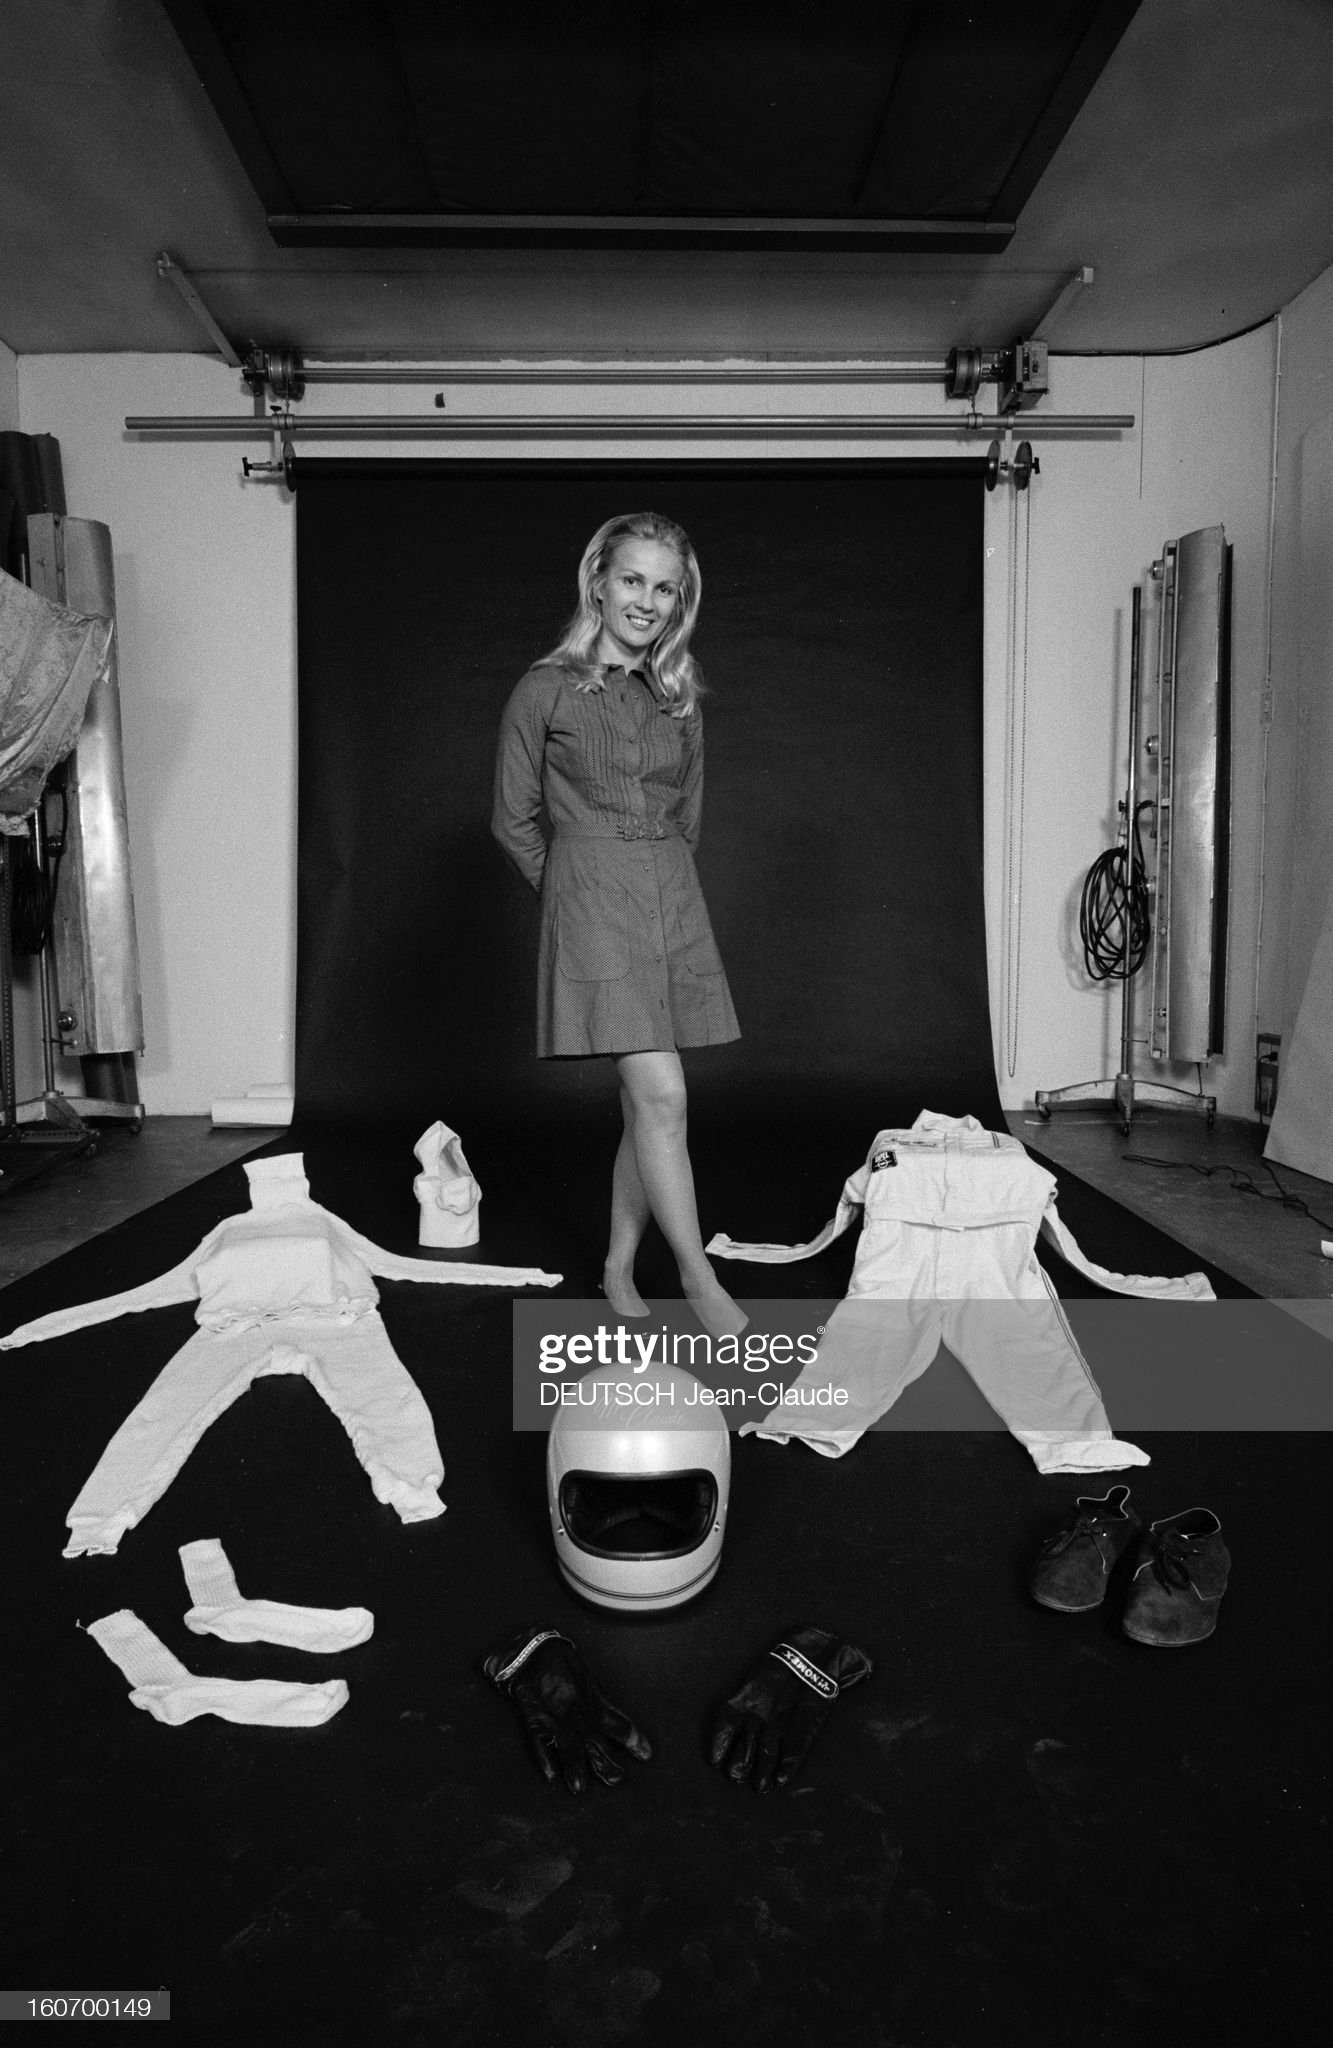 Marie-Claude Beaumont, race car driver, in France in June 1971 on the occasion of her first participation in the 24 Hours of Le Mans, wearing a short dress, posing with her equipment on the ground, overalls, helmet, shoes and gloves. 